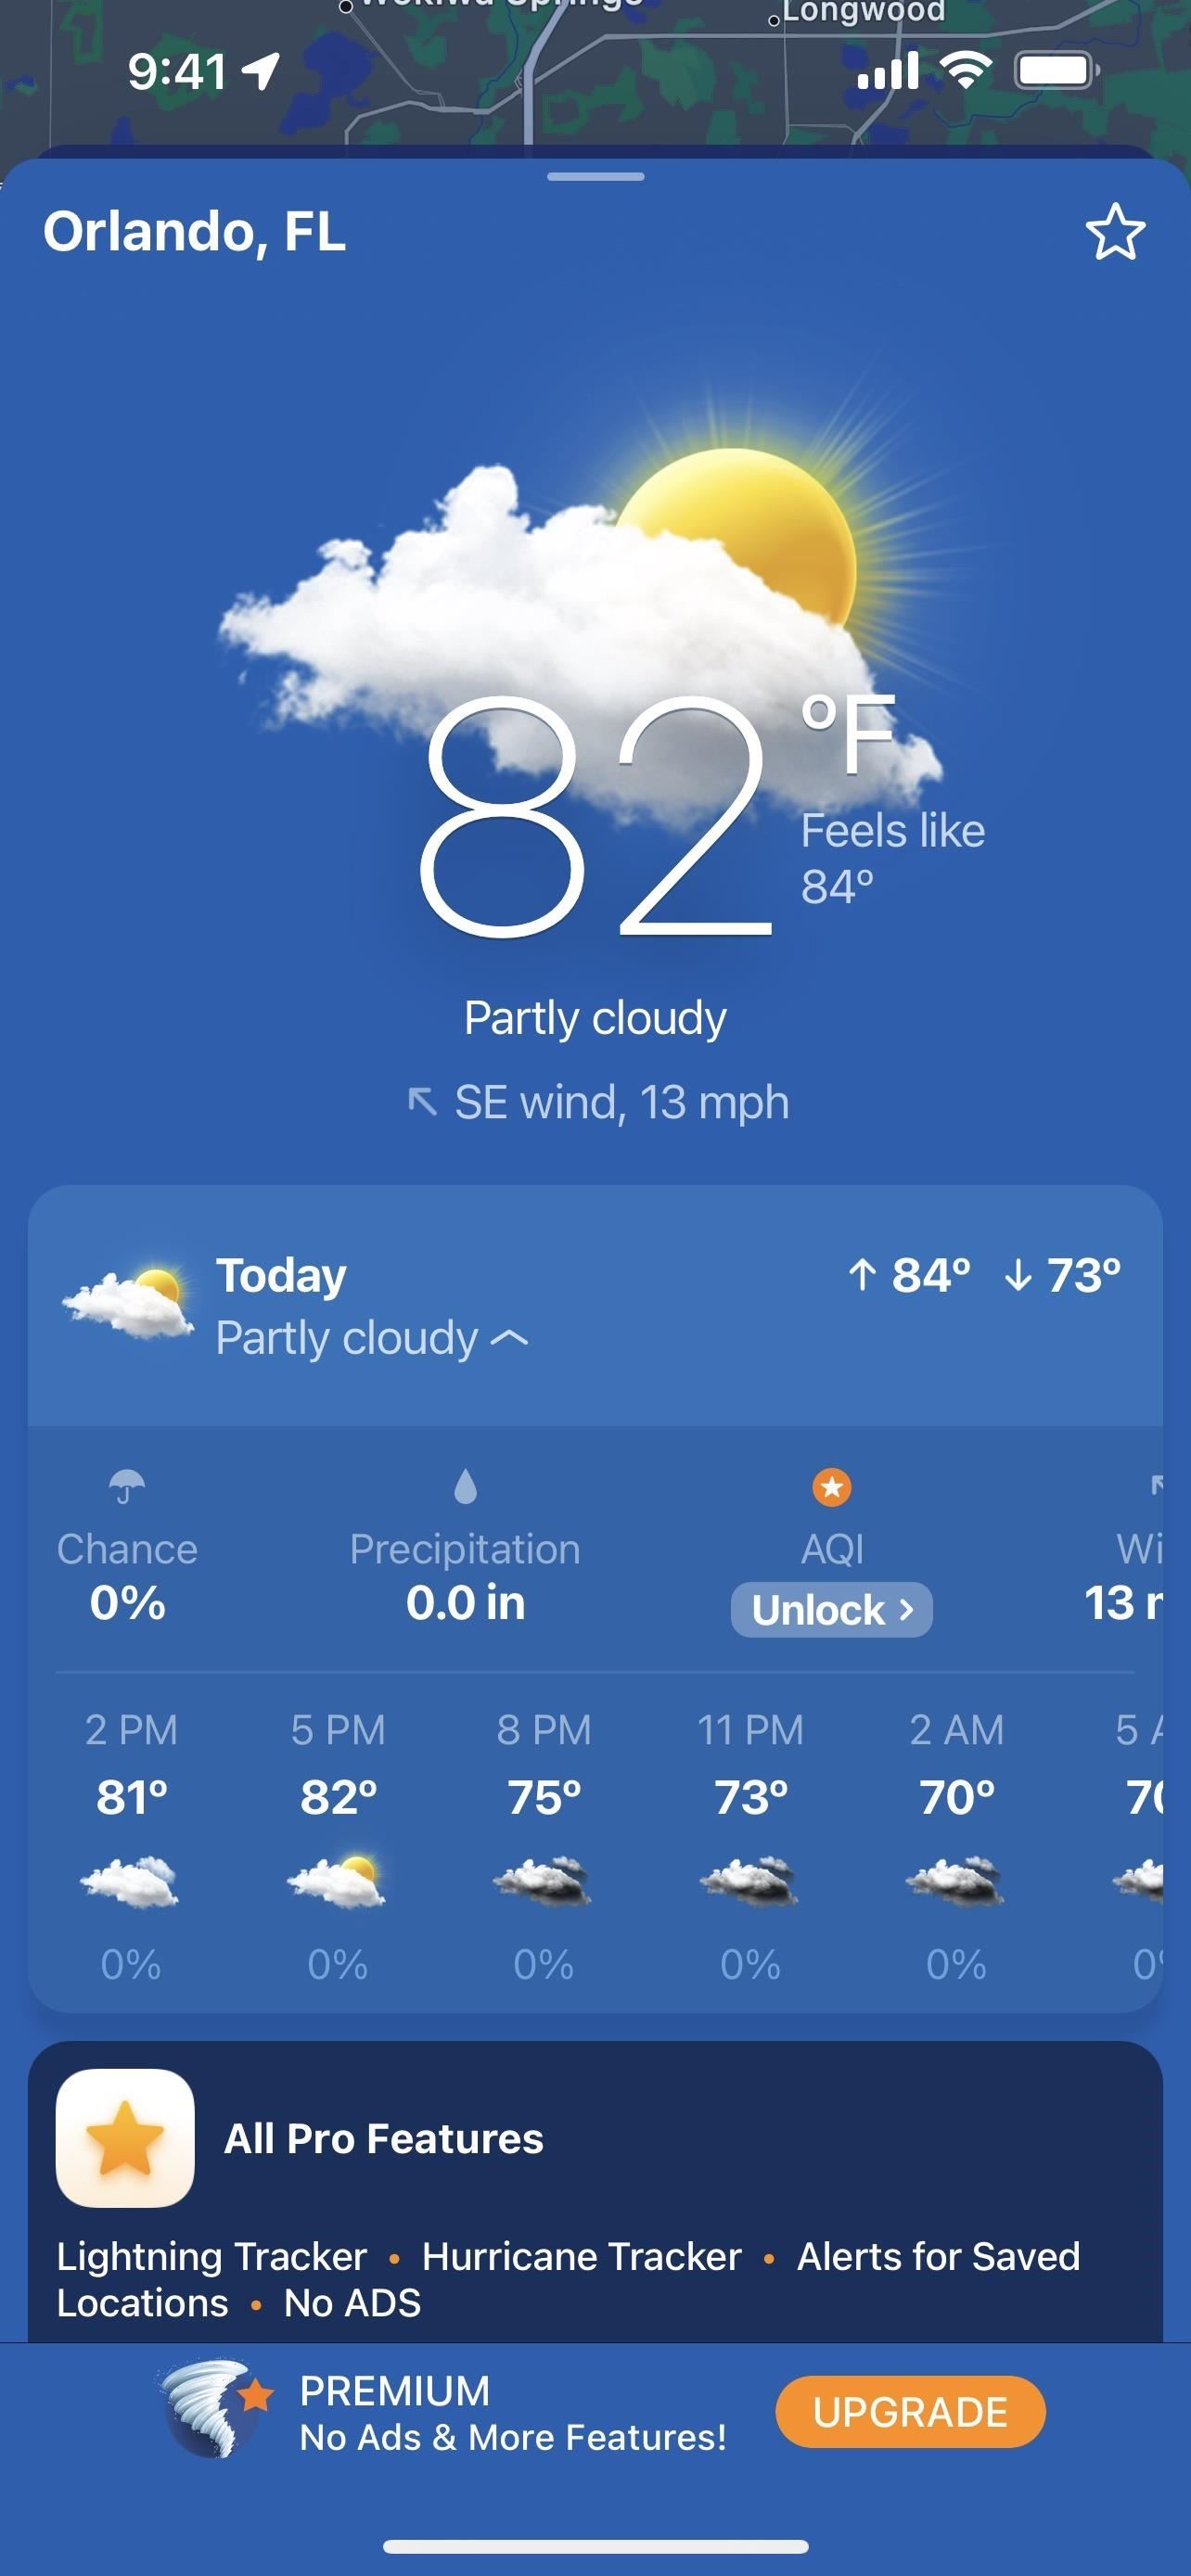 How to Find the Most Accurate Weather Source for Your Area (And See Which Apps Use It)